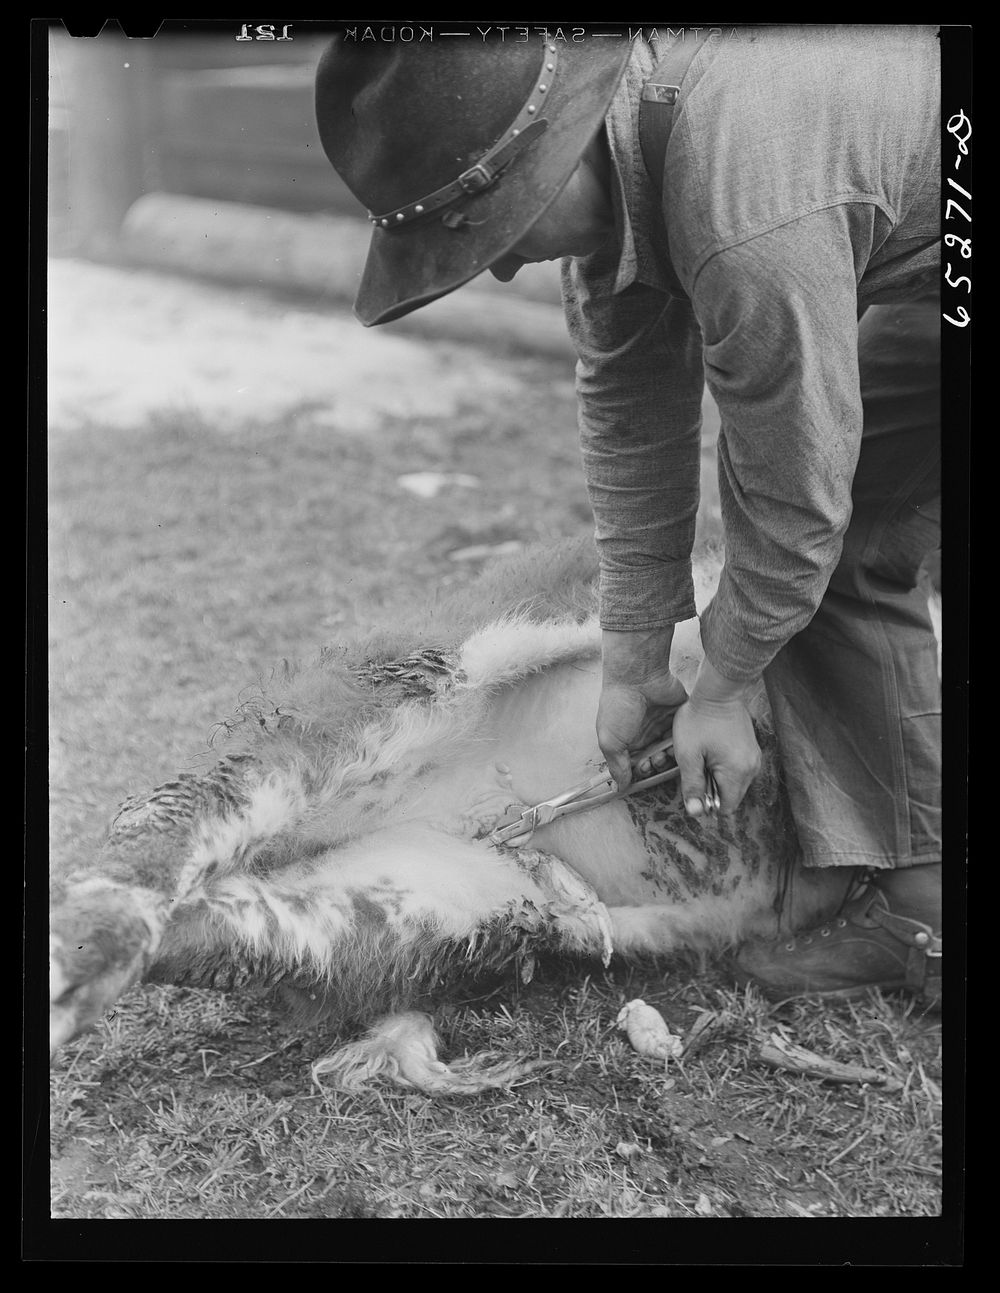 Bitterroot Valley, Montana. Castrating a calf. Sourced from the Library of Congress.